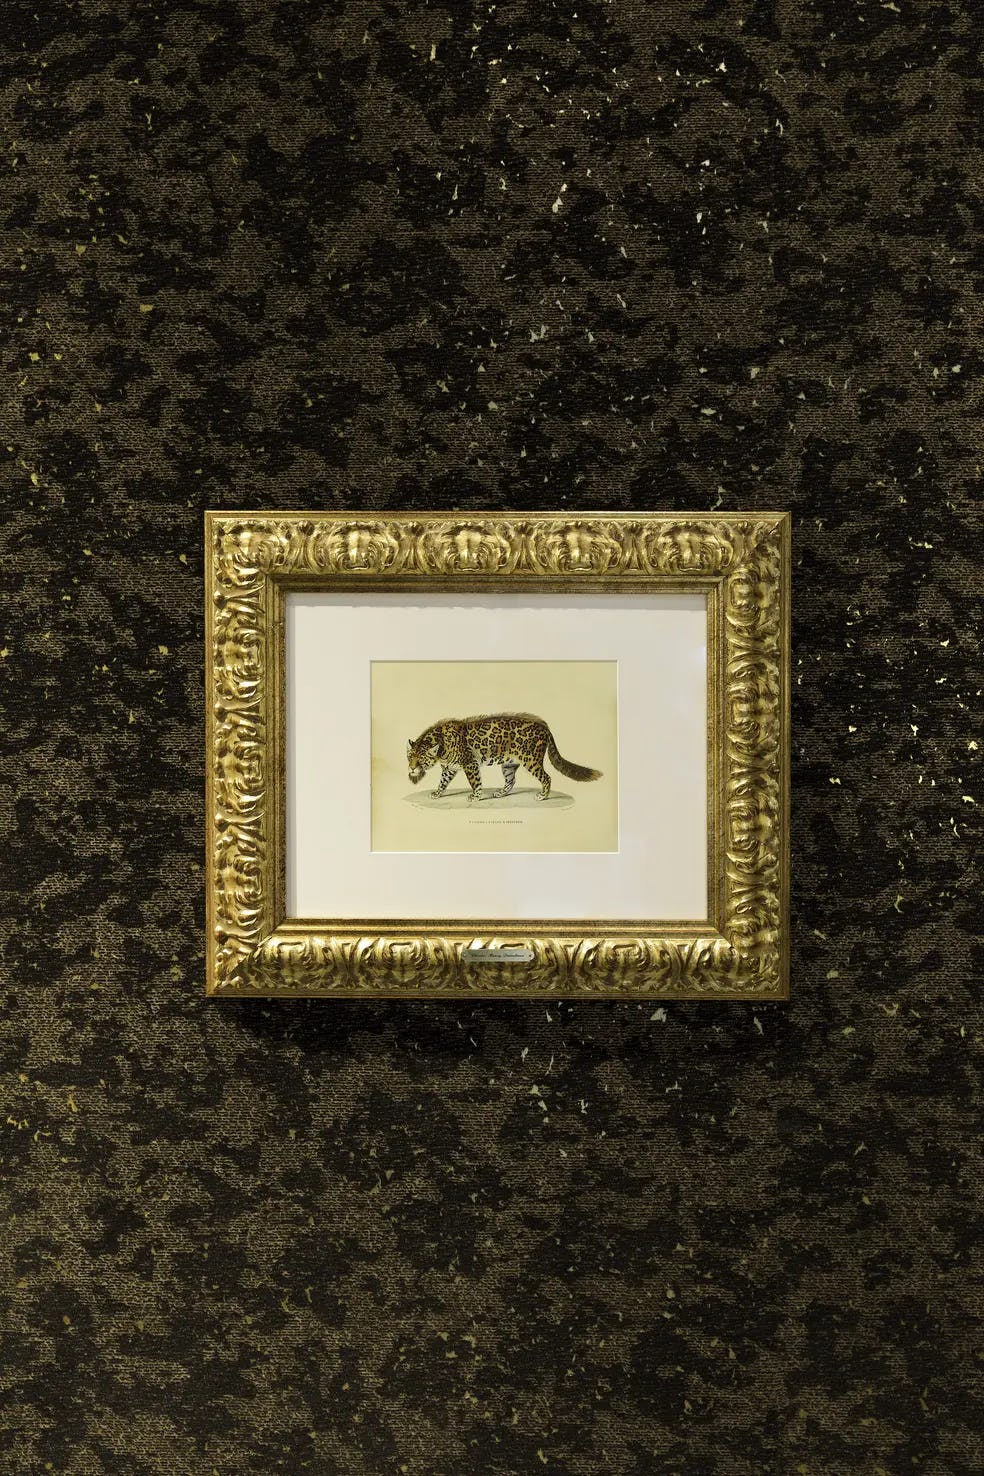 Interior of New York Brandstore 2018 with framed drawing of Bearded Leopard